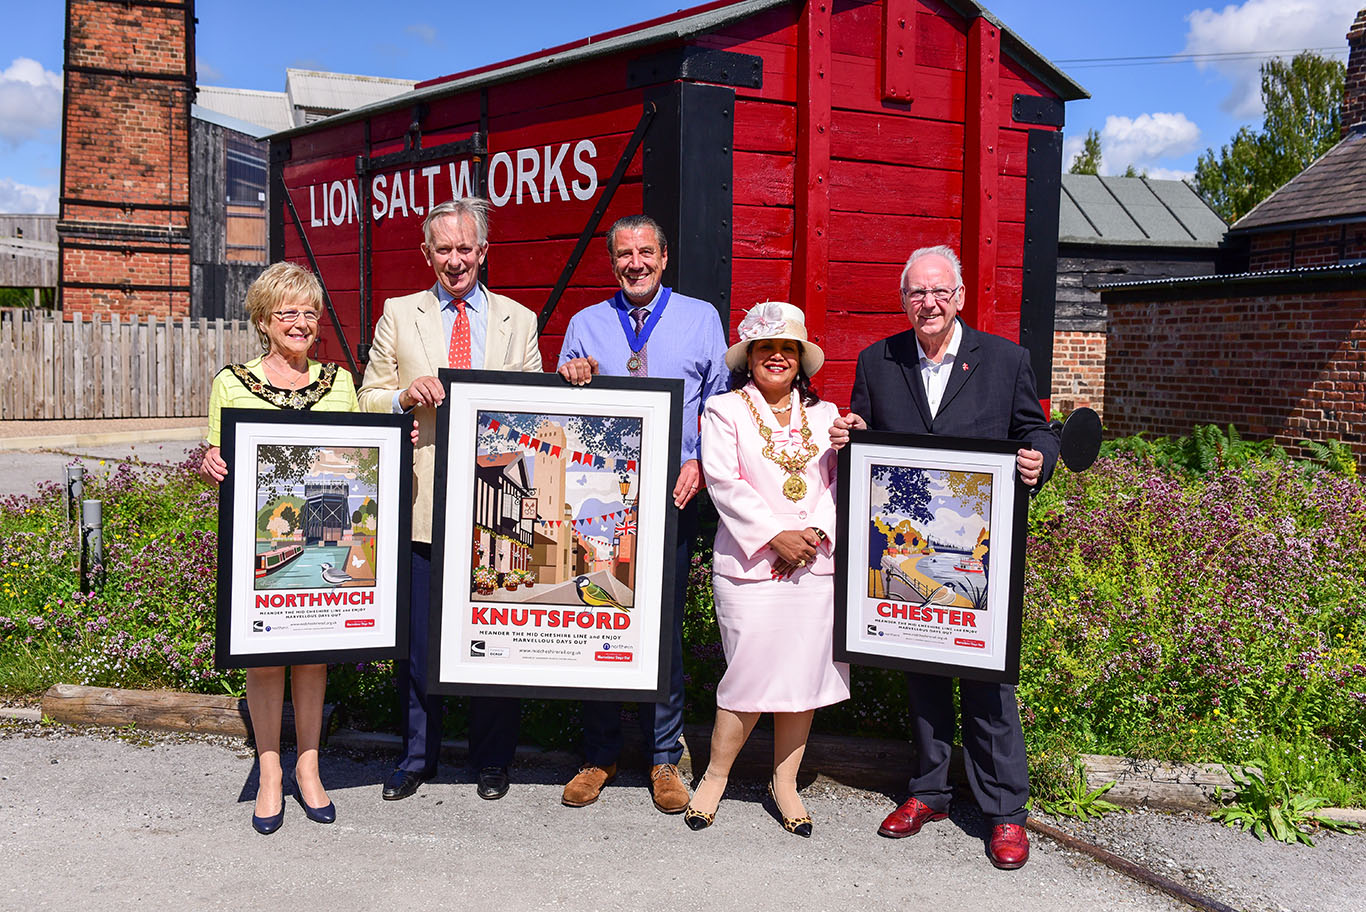 The Lord Lieutenant of Cheshire, Pete Waterman OBE and the Mayors of Northwich, Knutsford and Chester at the opening of the MDO exhibition at the Lion Salt Works Museum.jpg